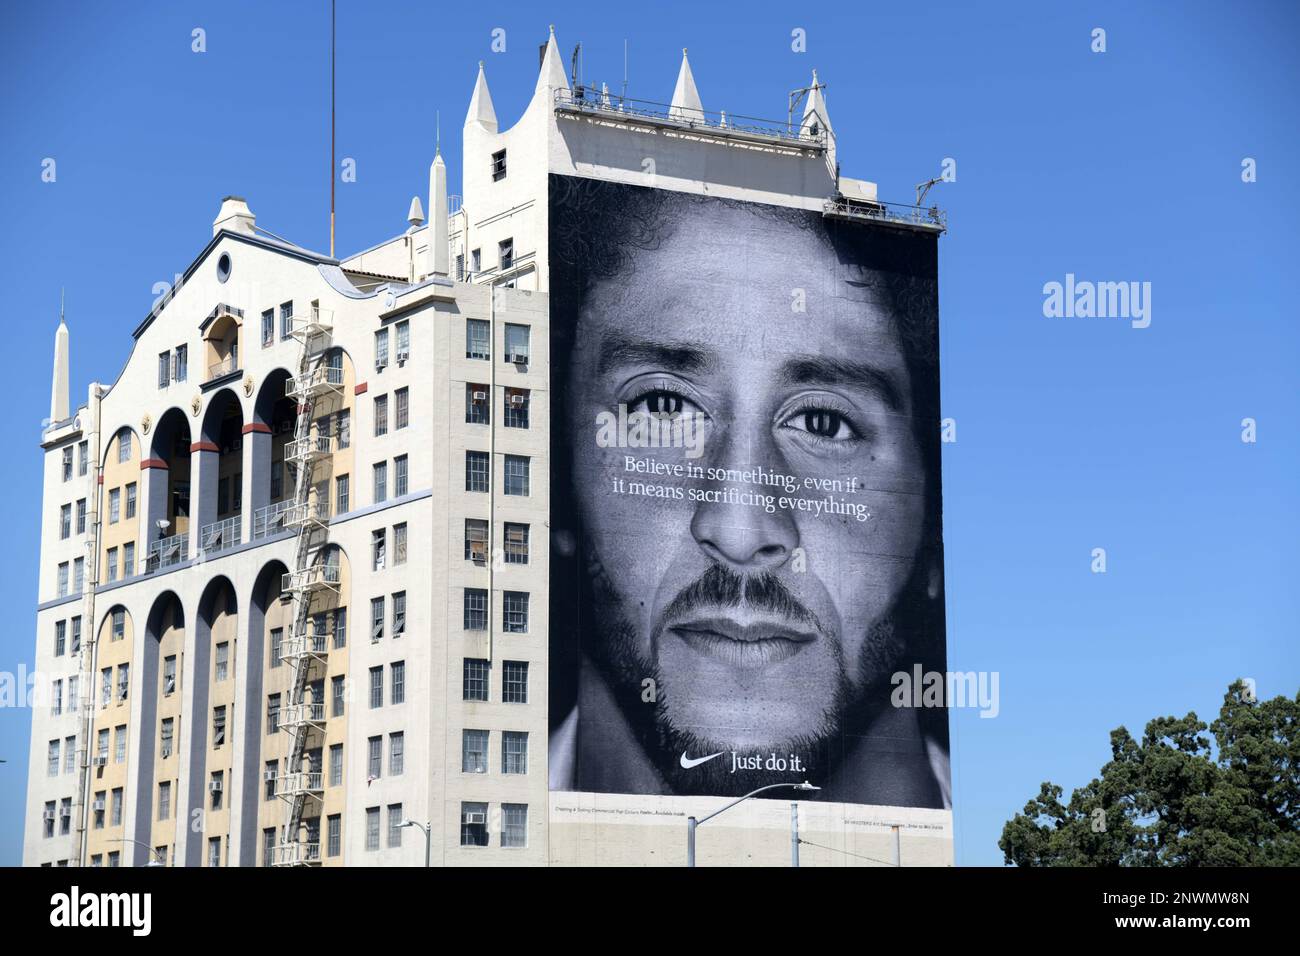 What Nike's Just Do It Ad Means for Colin Kaepernick